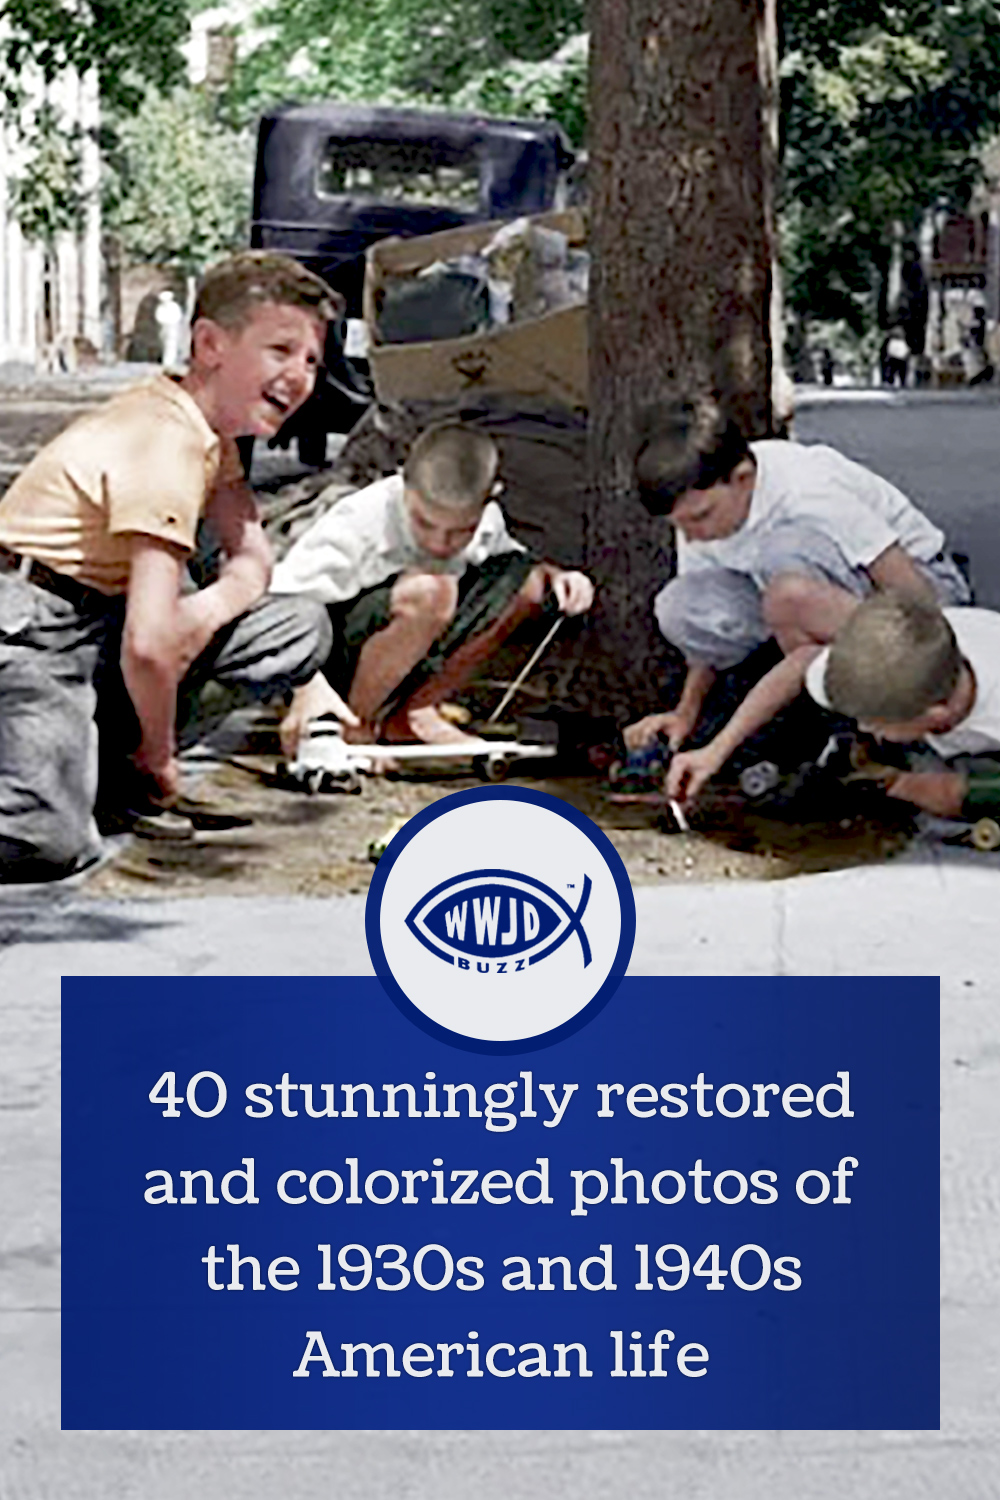 40 stunningly restored and colorized photos of the 1930s and 1940s American life